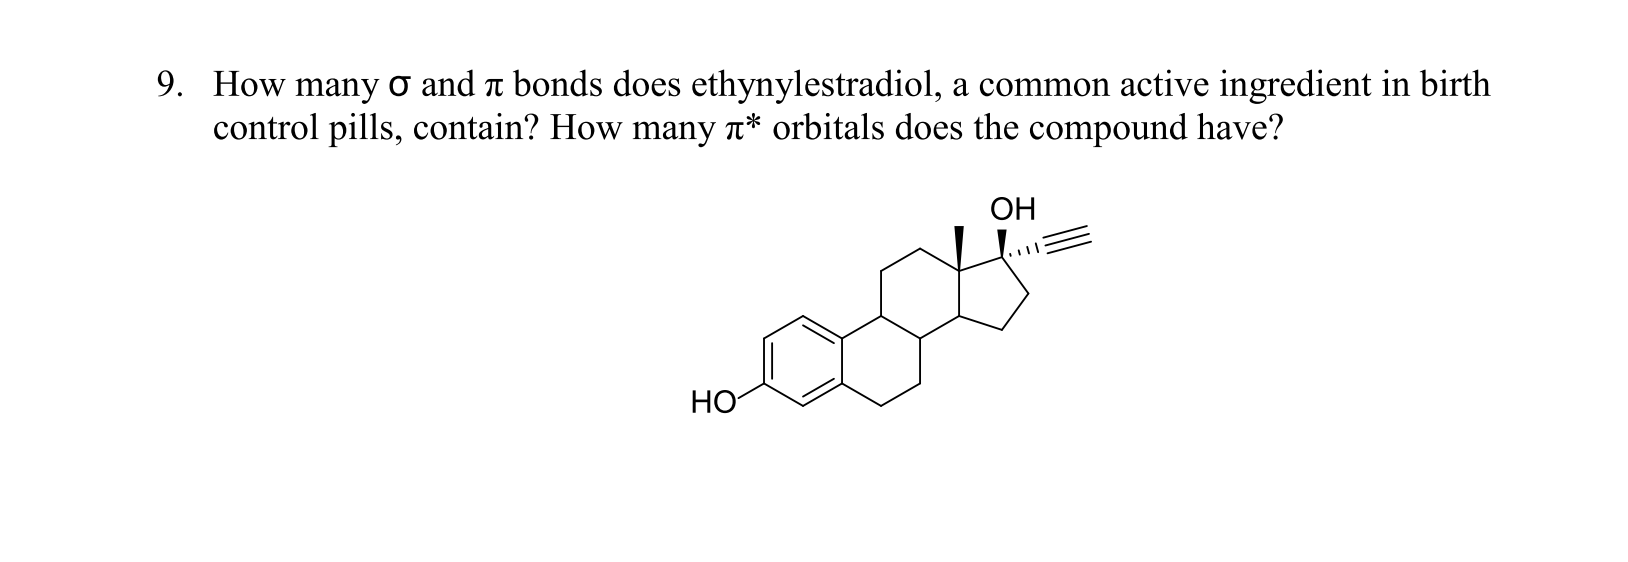 9. How many o and a bonds does ethynylestradiol, a common active ingredient in birth
control pills, contain? How many a* orbitals does the compound have?
ОН
НО
